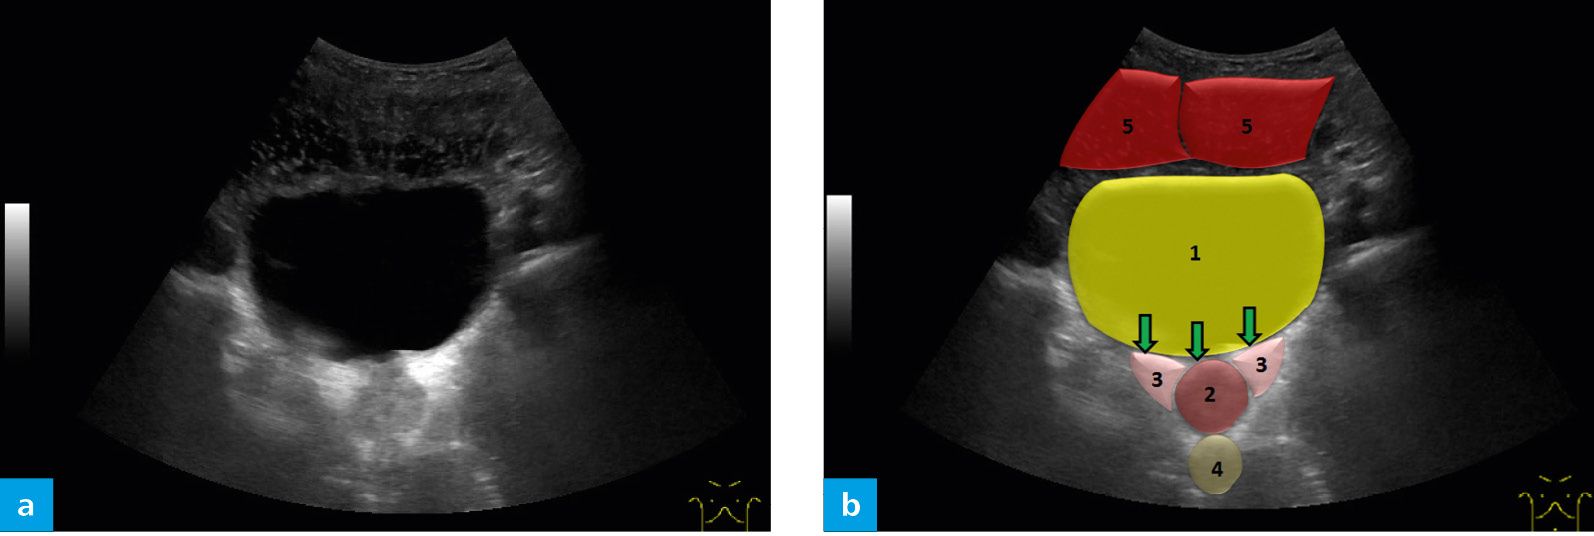 A) A B-mode ultrasound image of a bladder in a transverse section